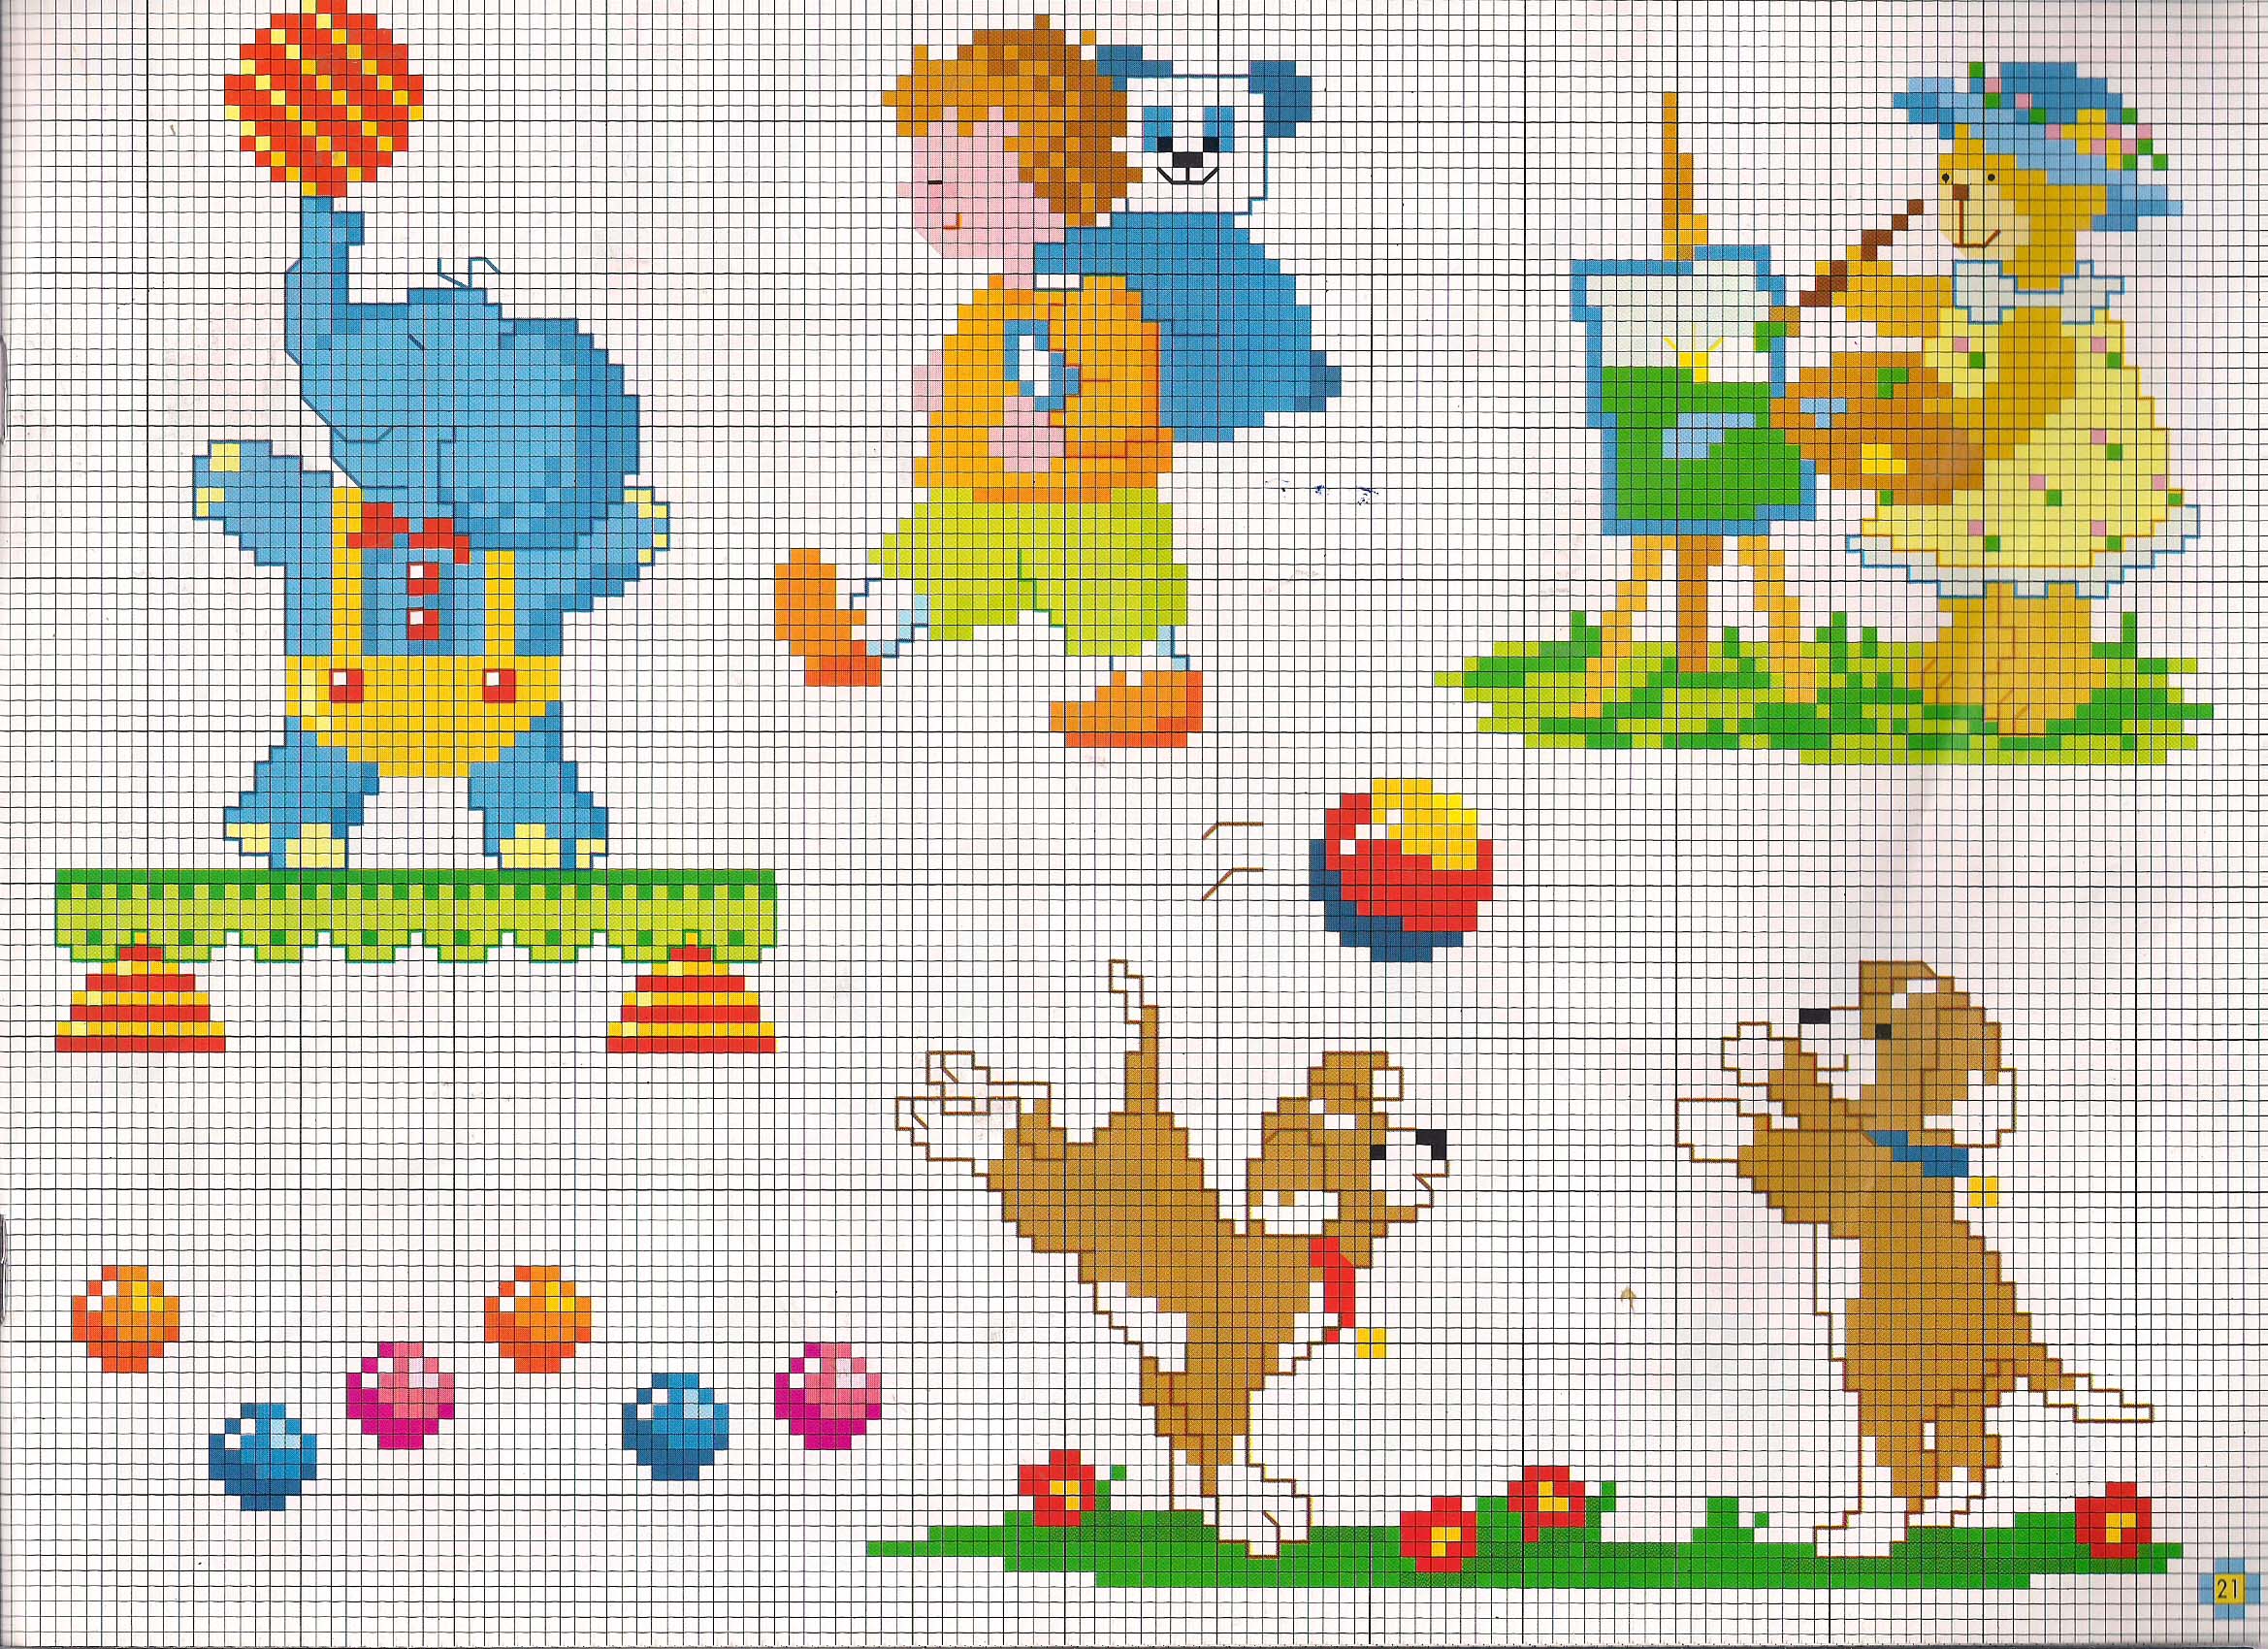 Elephants and teddy bears playing baby cross stitch patterns